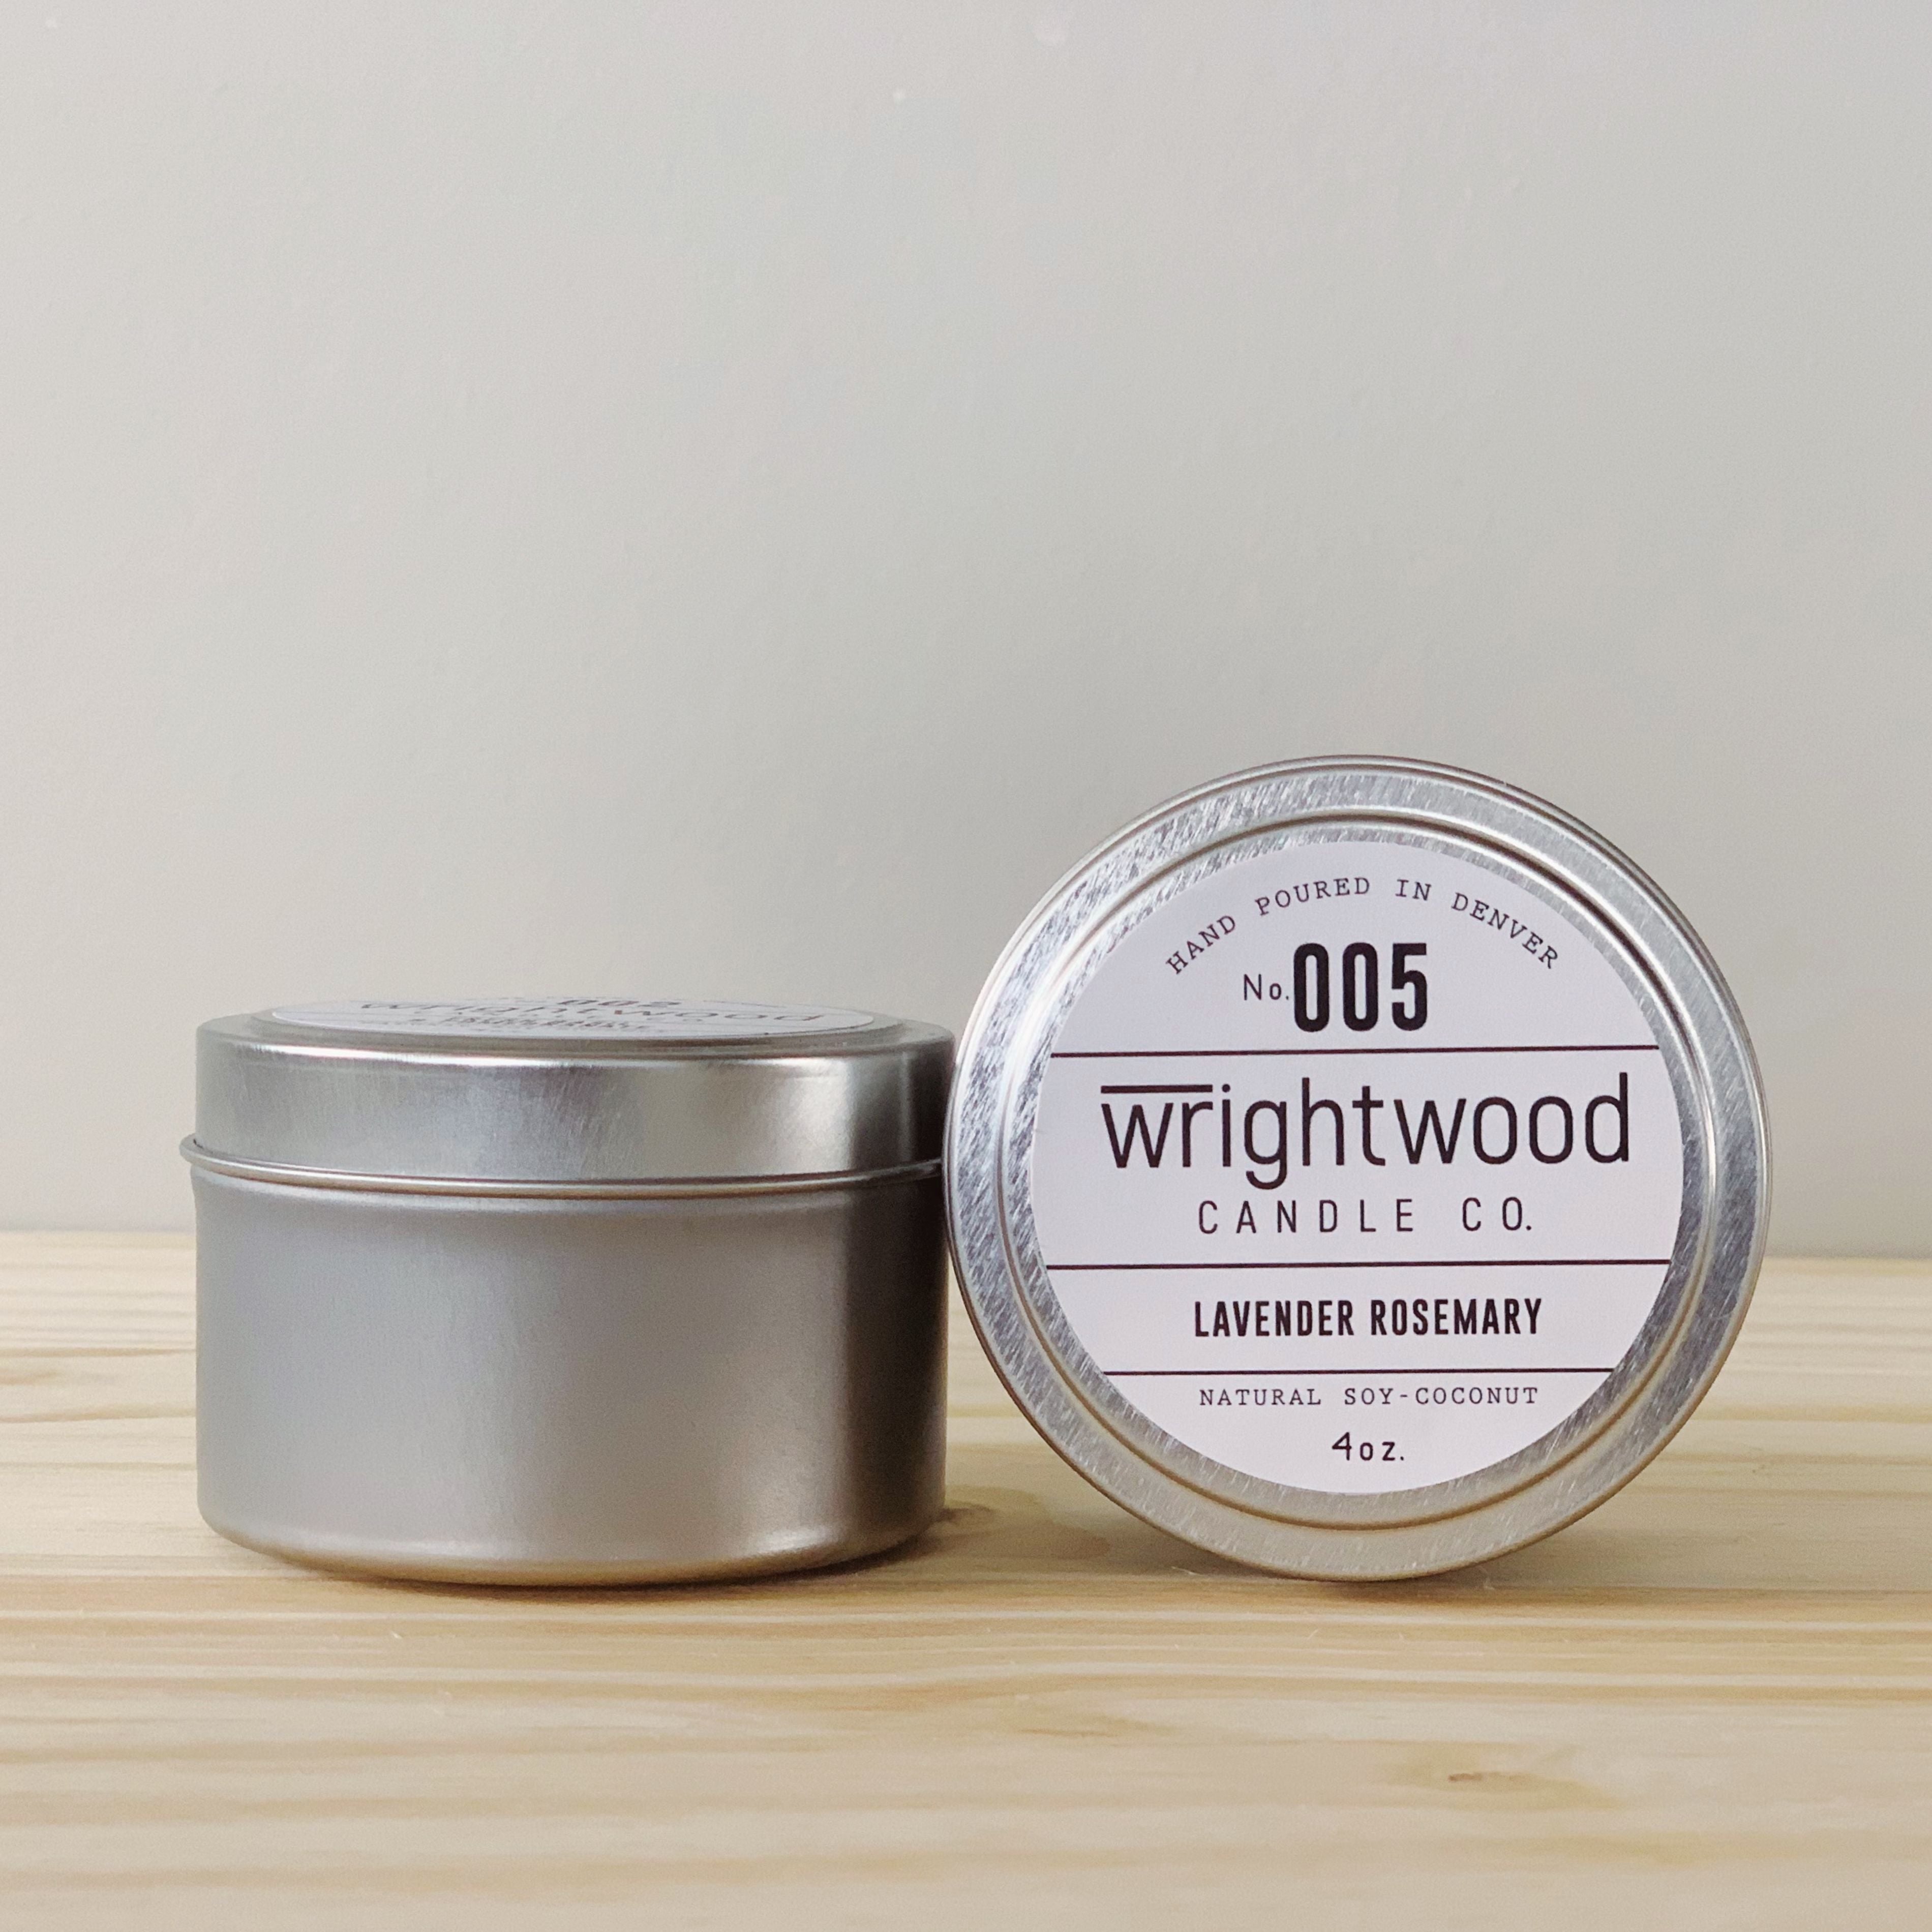 Two silver tins are on a wood table with a light colored background. The one on the left is upright while the one on the right has the lid facing outward with label visible. The label states the company name (Wrightwood Candle Co), scent name, what it is made out of (soy-coconut wax), where it is hand poured (Denver) and item weight (4oz.)